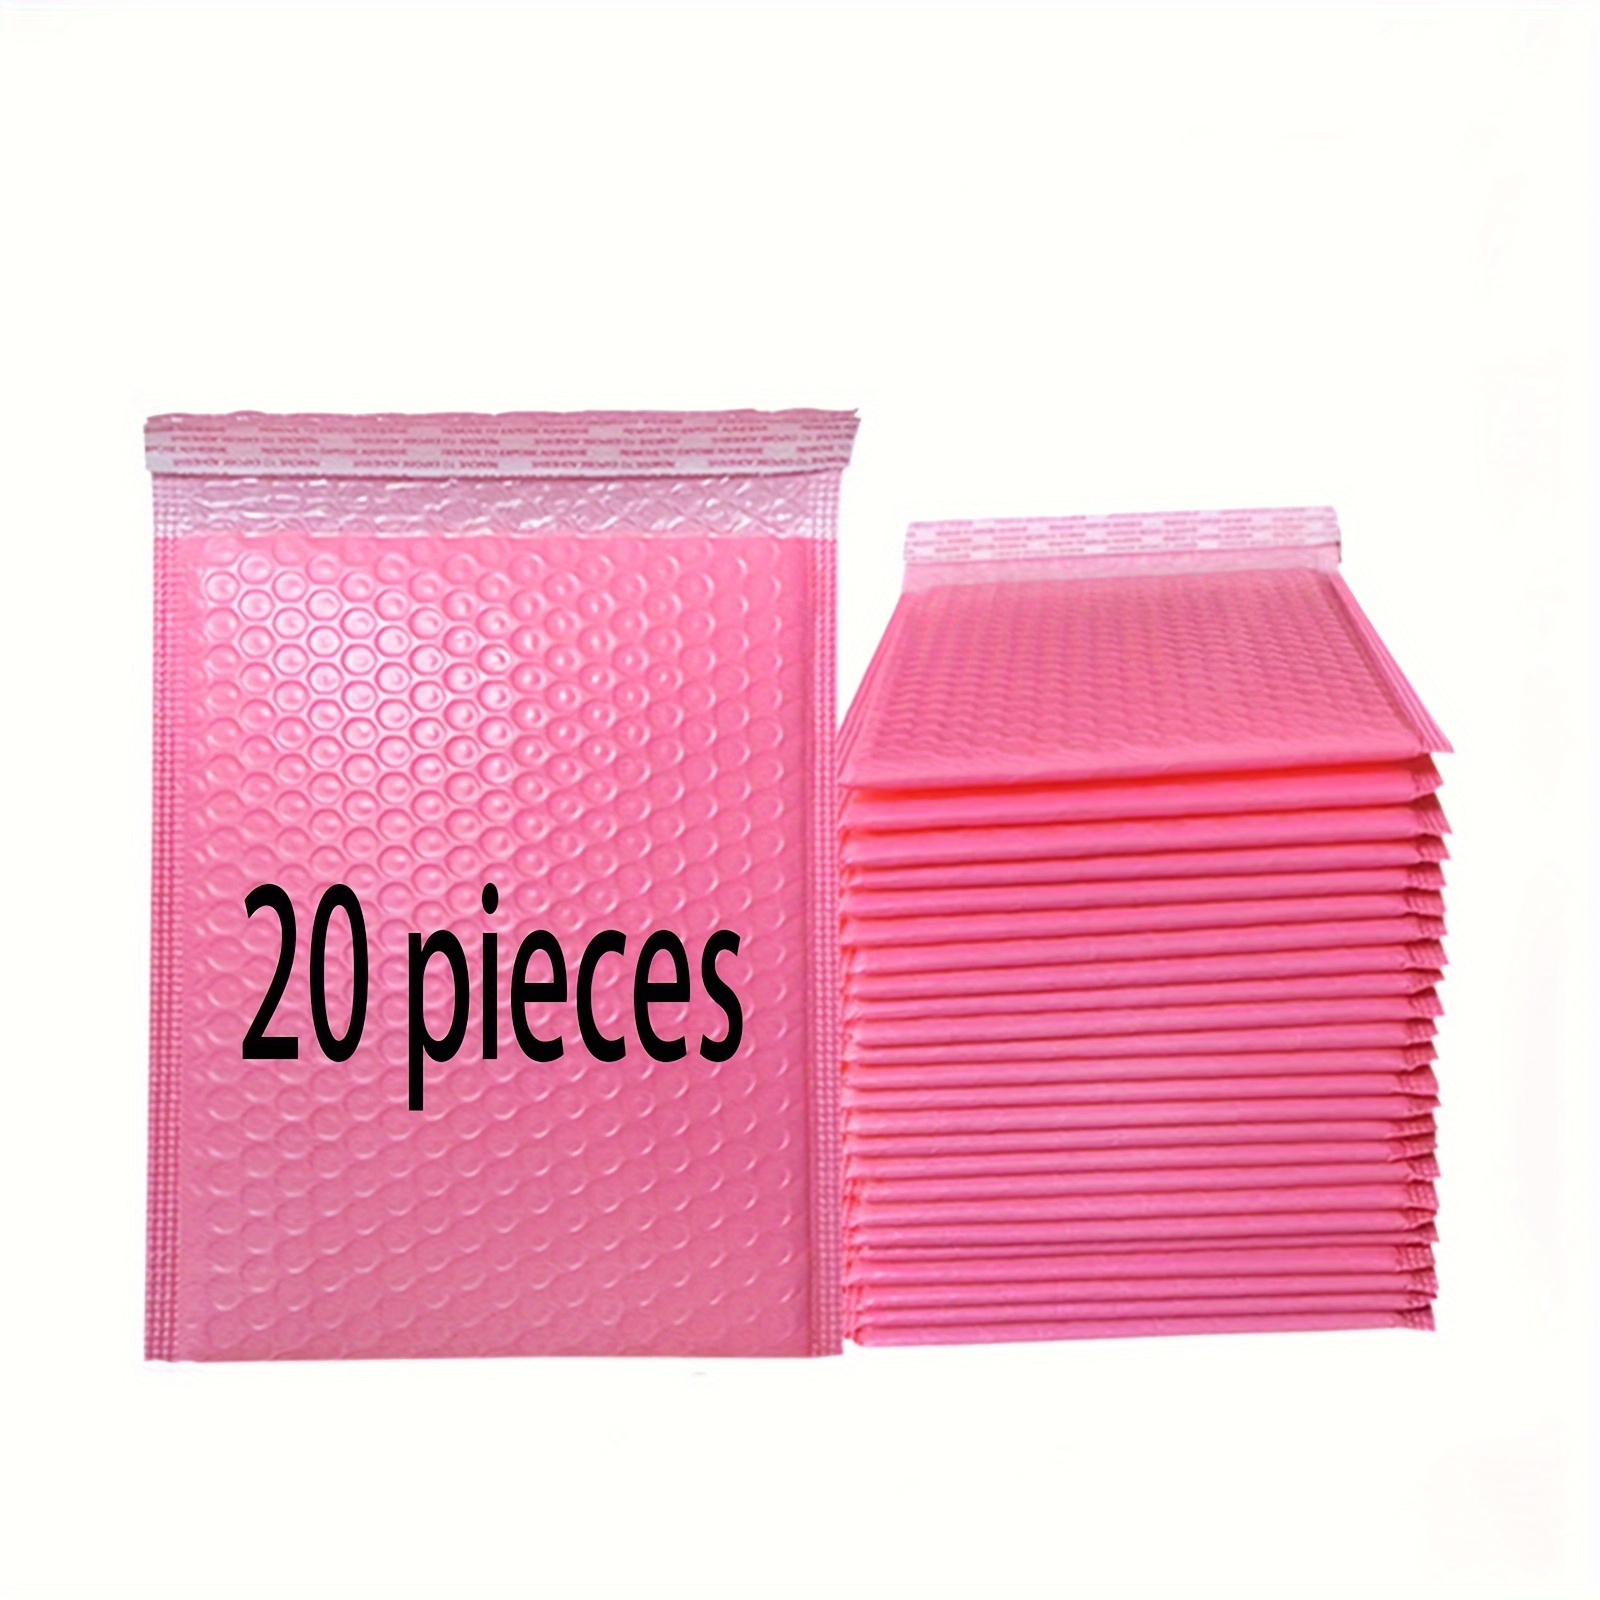 

20pcs Large Capacity Pink Self-adhesive Waterproof Bubble Bags Small Business Mailing Waterproof Boutique Mailing Jewelry Cosmetics - Great For Buffering And Pressure Resistant Storage